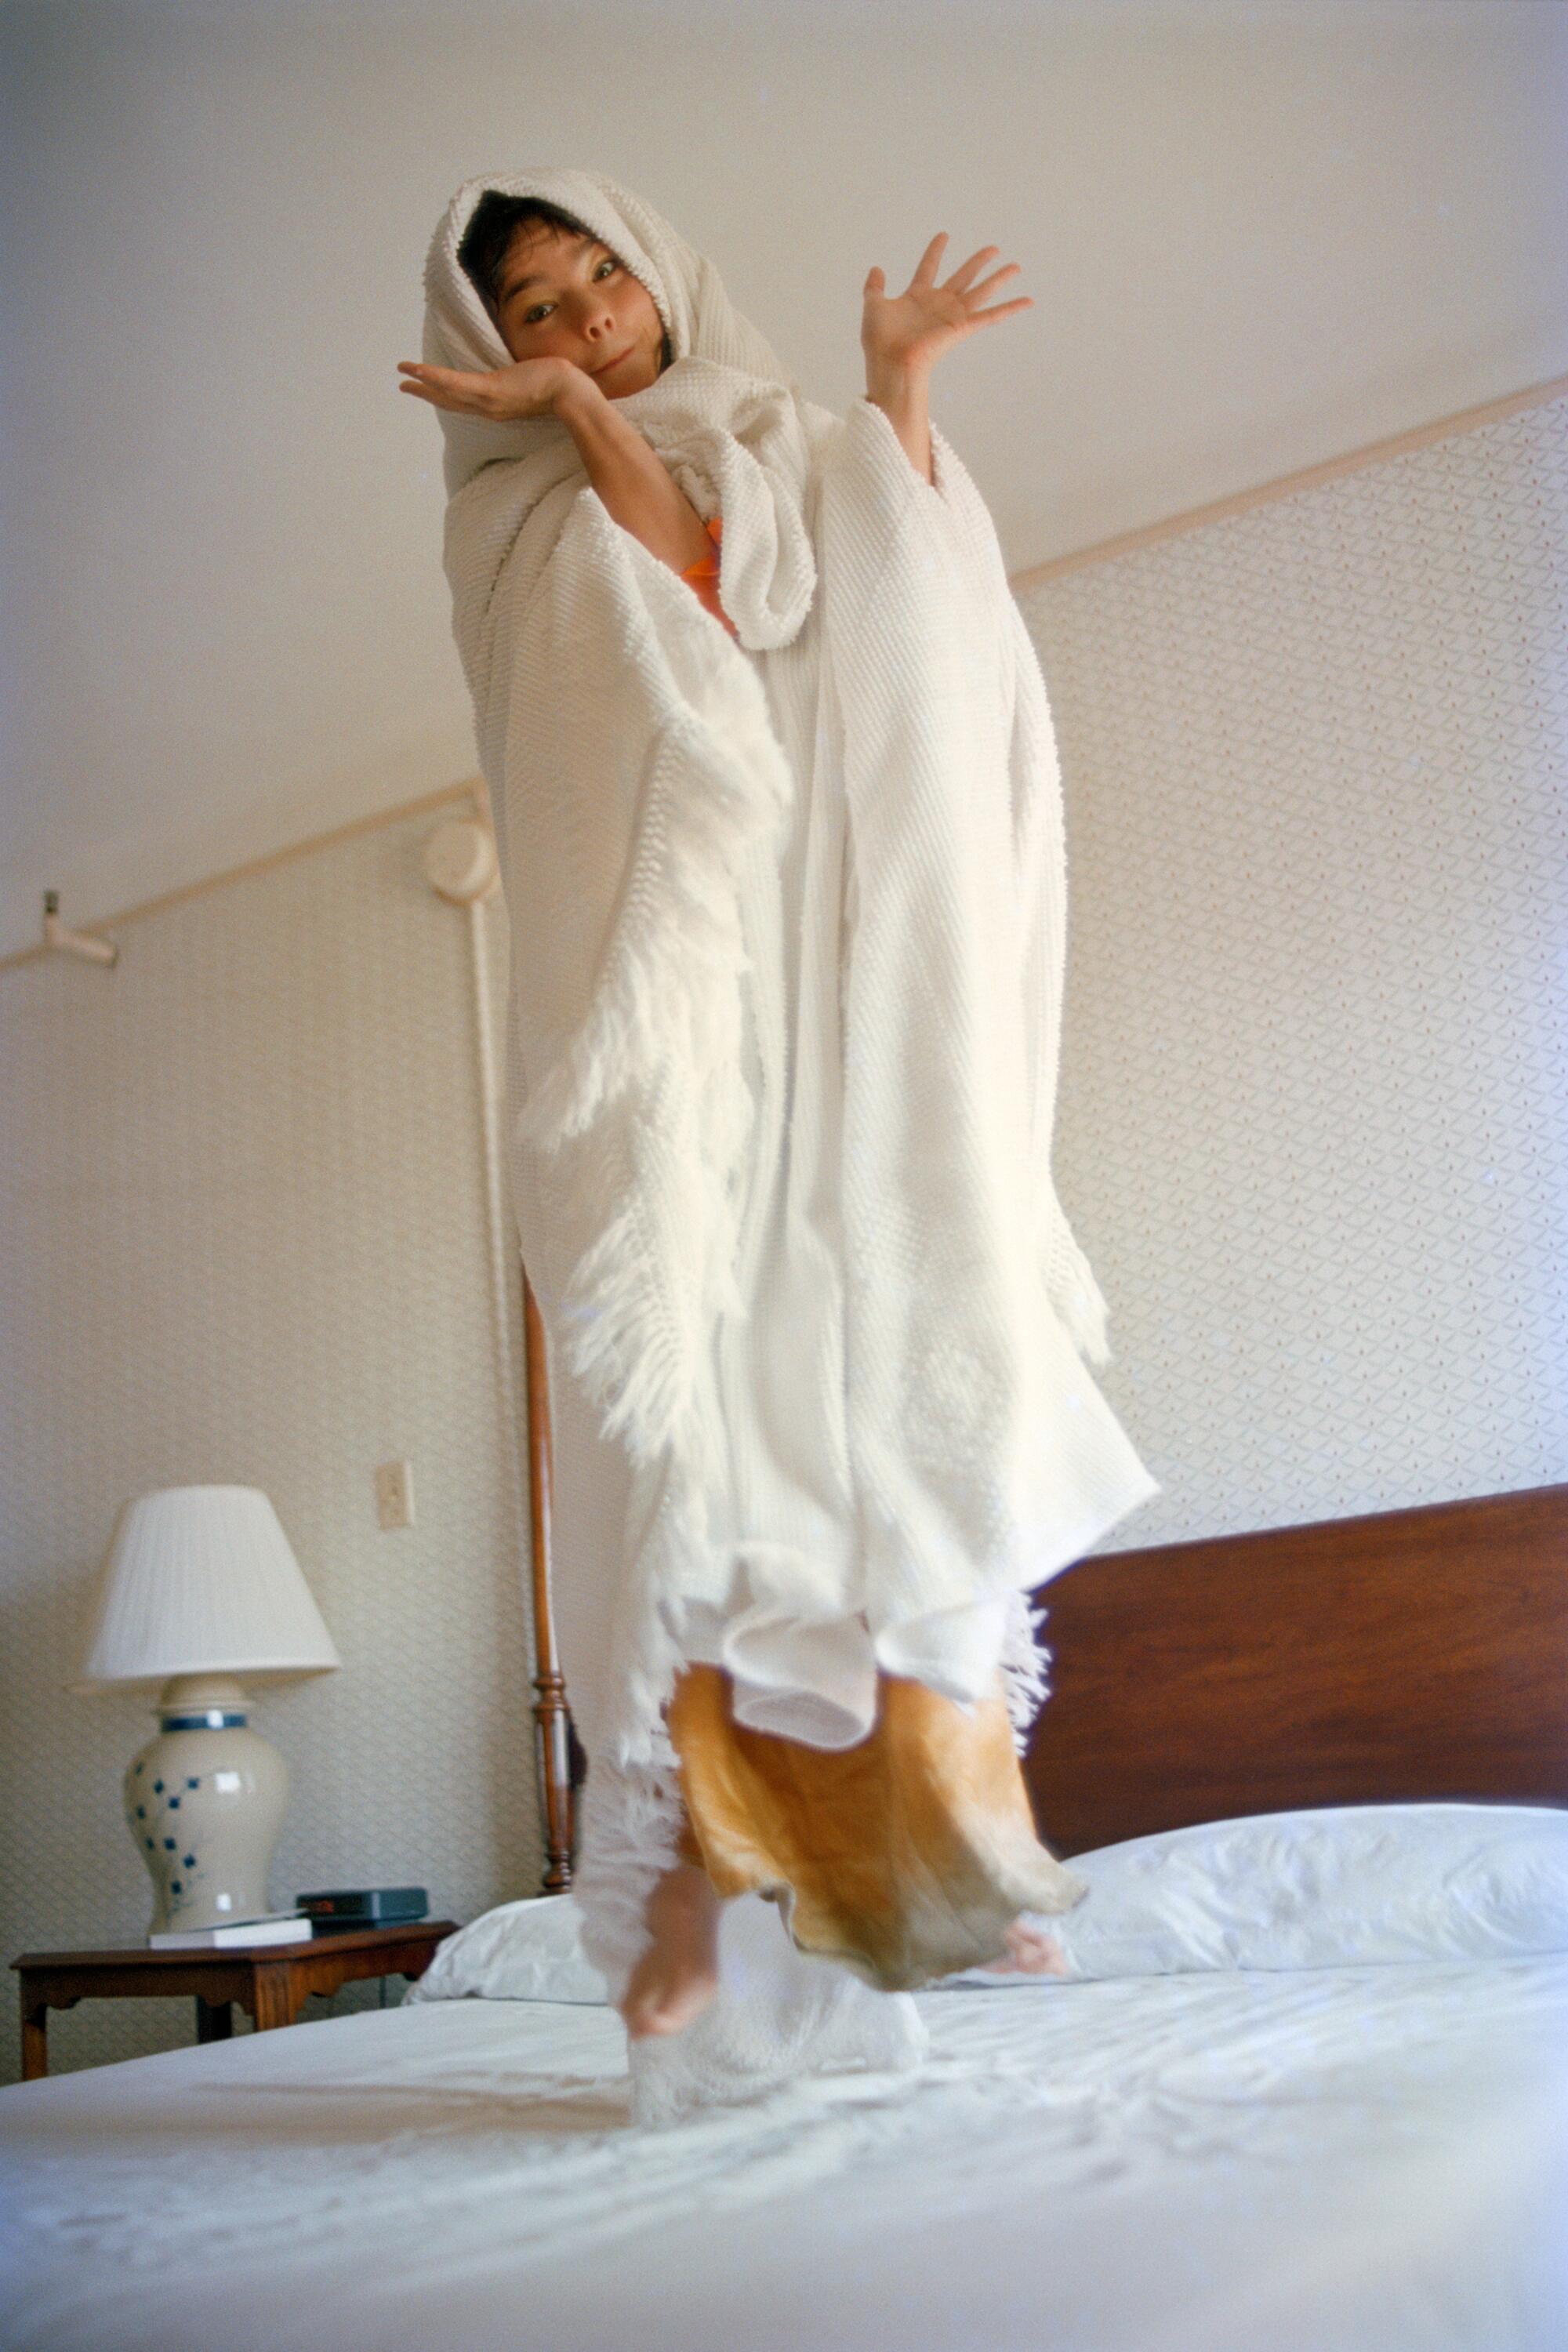 Bjrk jumps on a bed, wrapped in a white sheet, making a playful face.